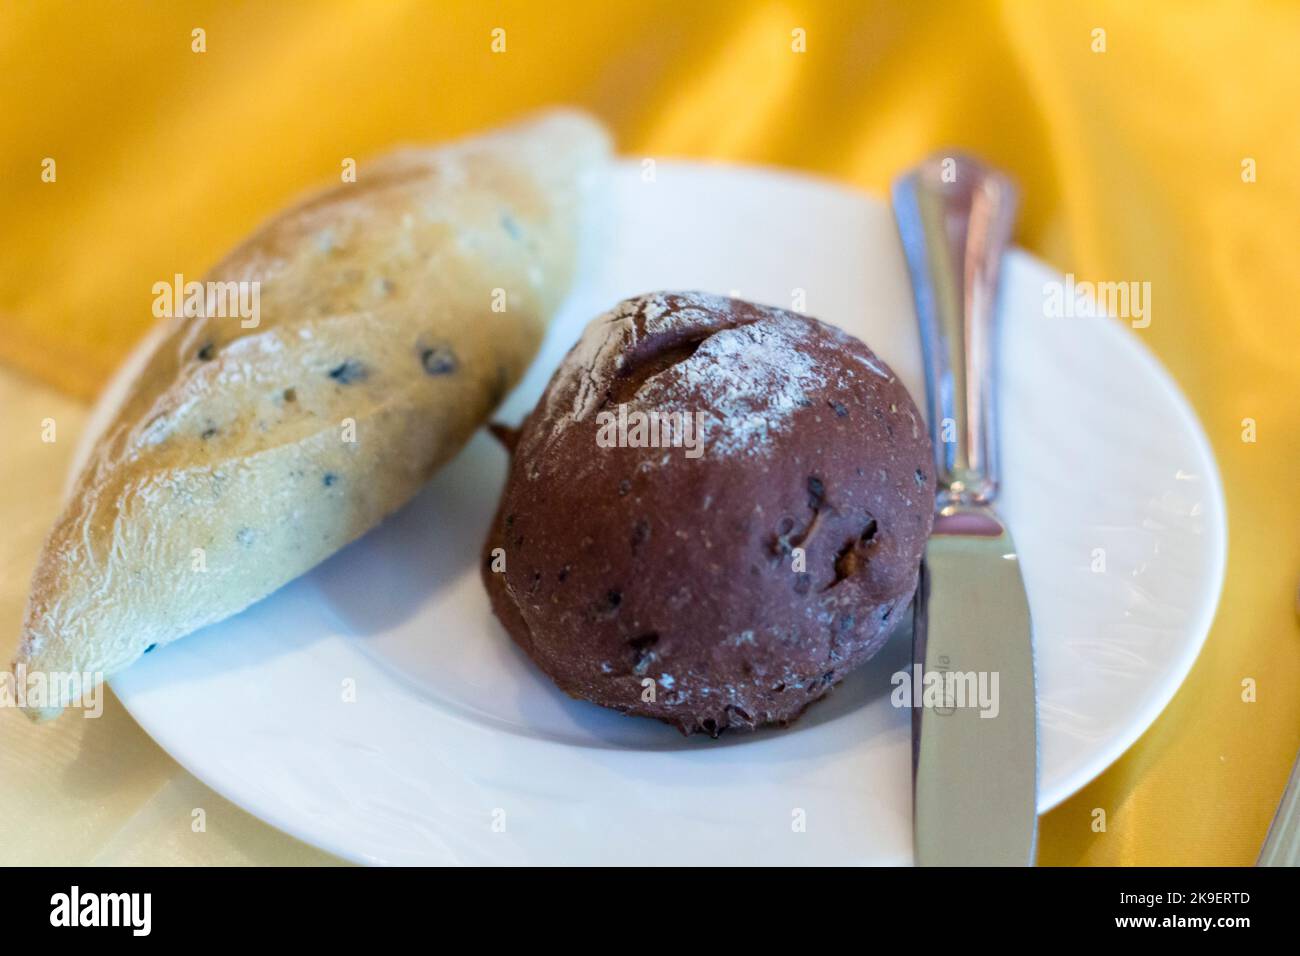 A serving of bread at Mozaic, a high end restaurant in Bali, Indonesia Stock Photo